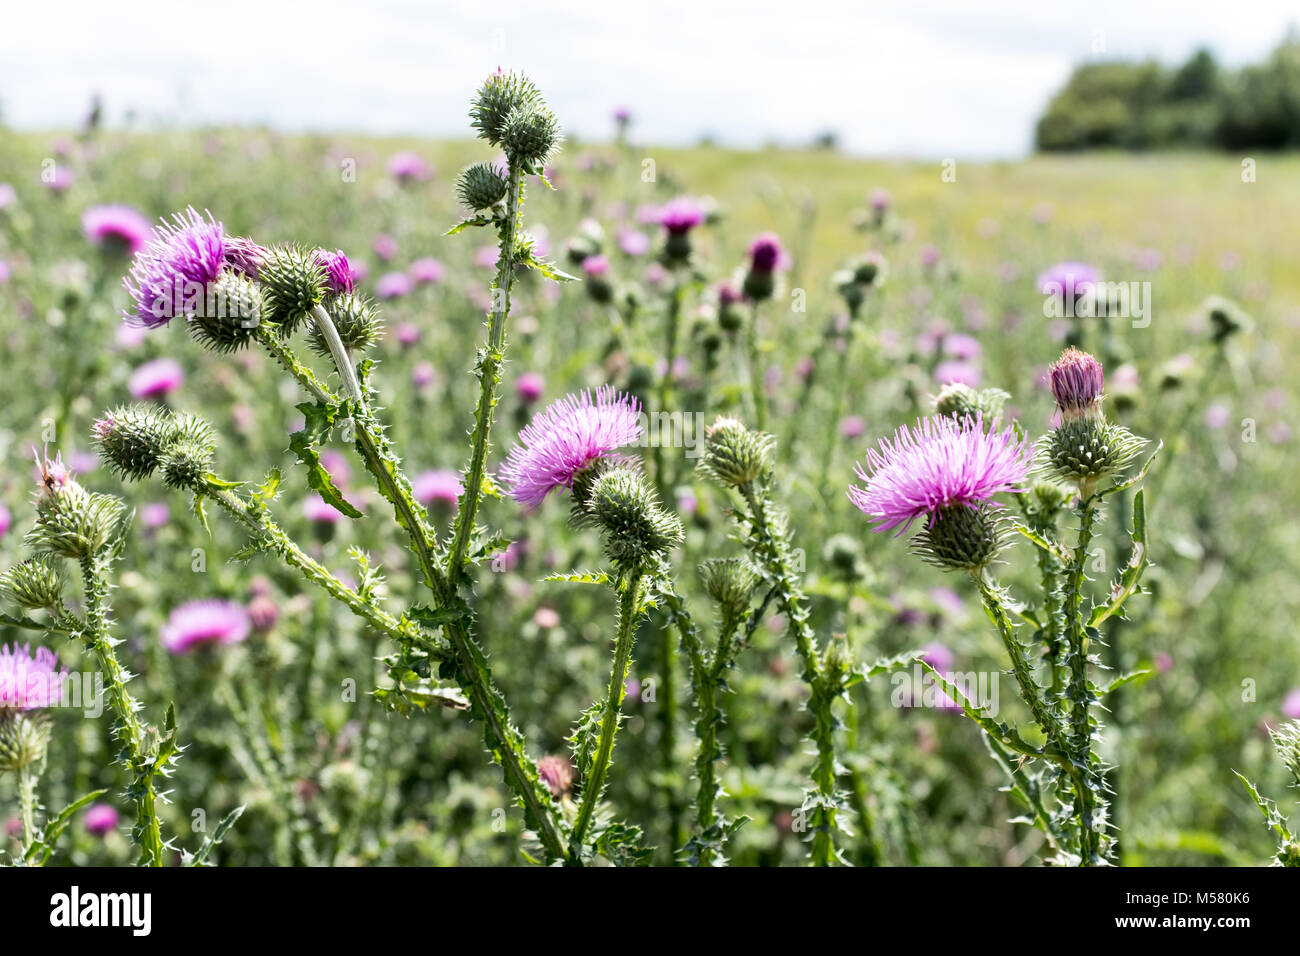 Thistles standing in a wild meadow in Brandenburg, Germany. Stock Photo